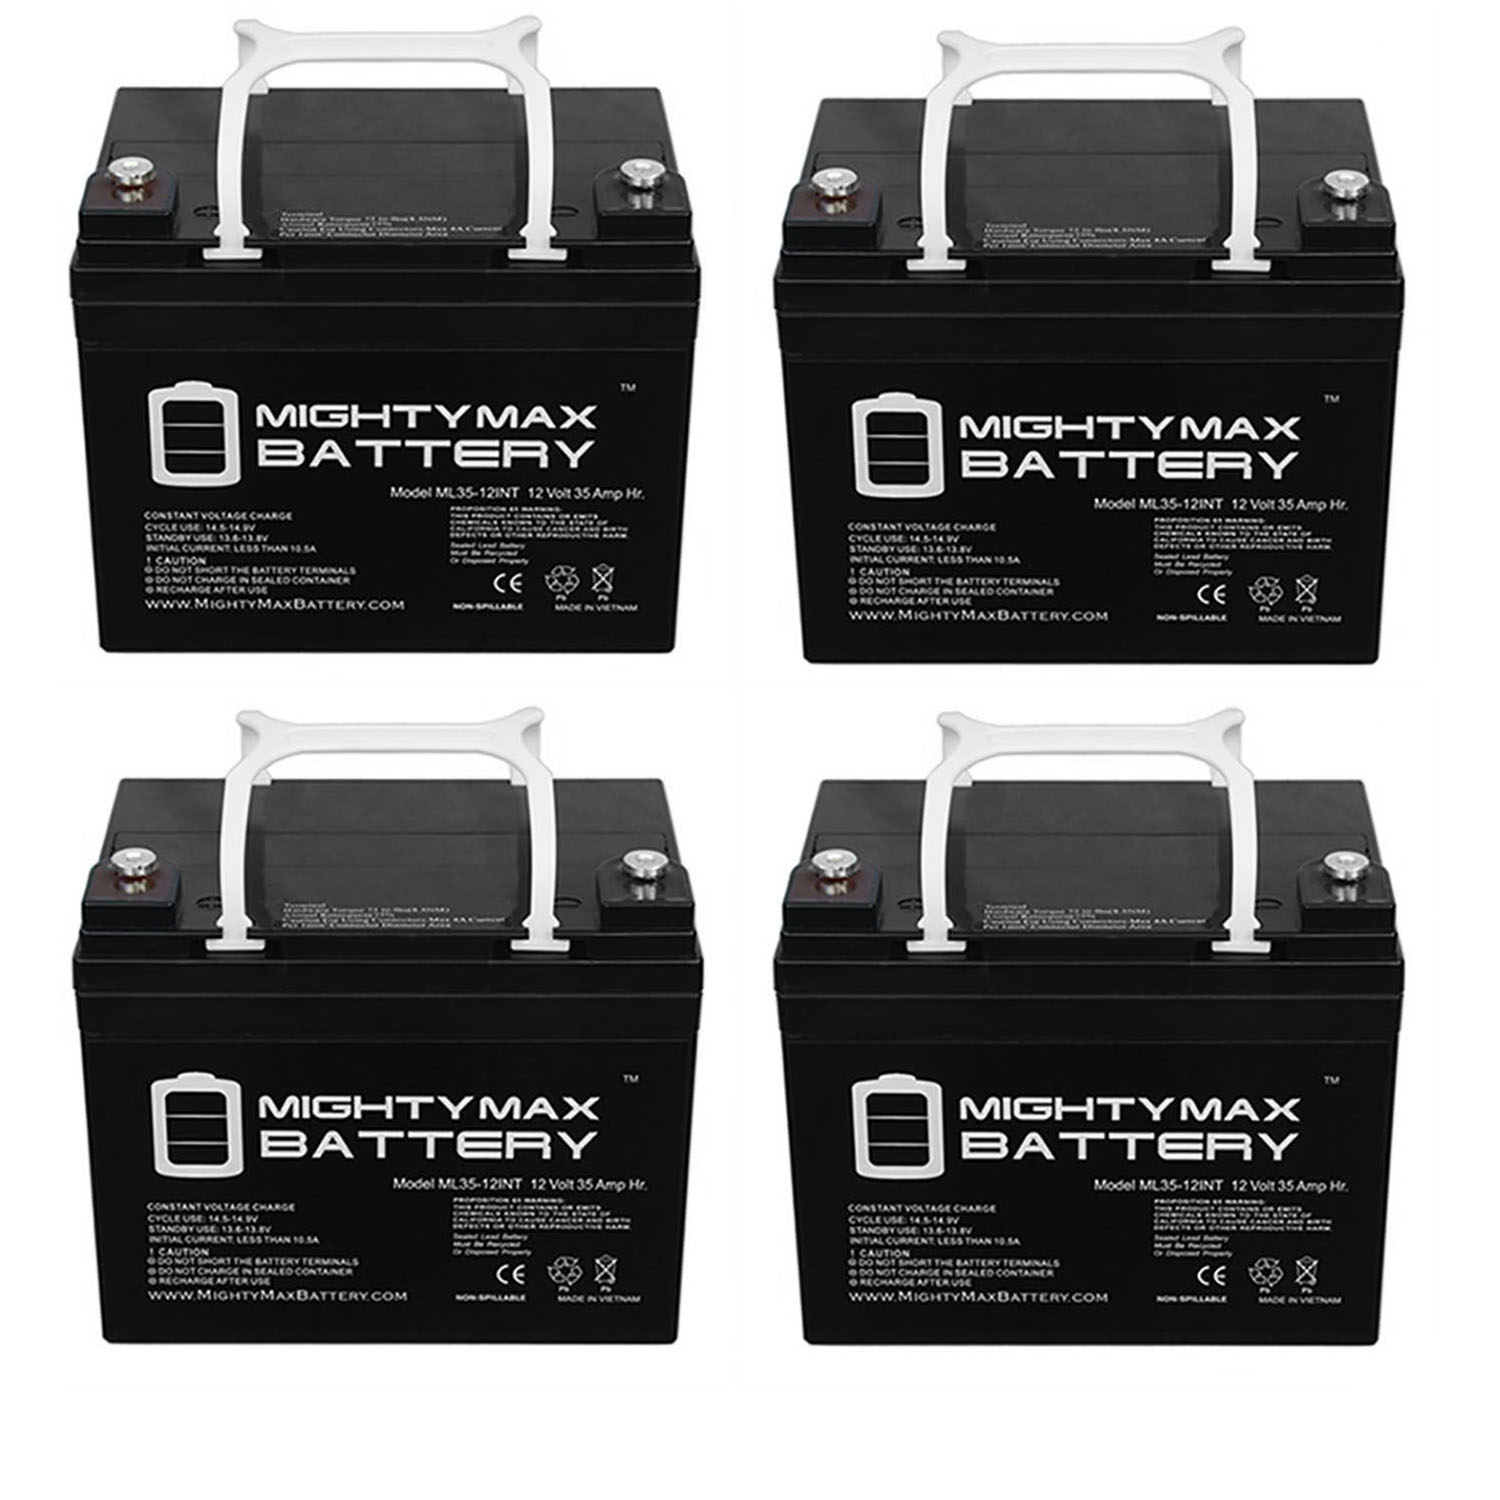 12V 35AH INT Replacement Battery for Ihc Cub Garden 182 - 4 Pack